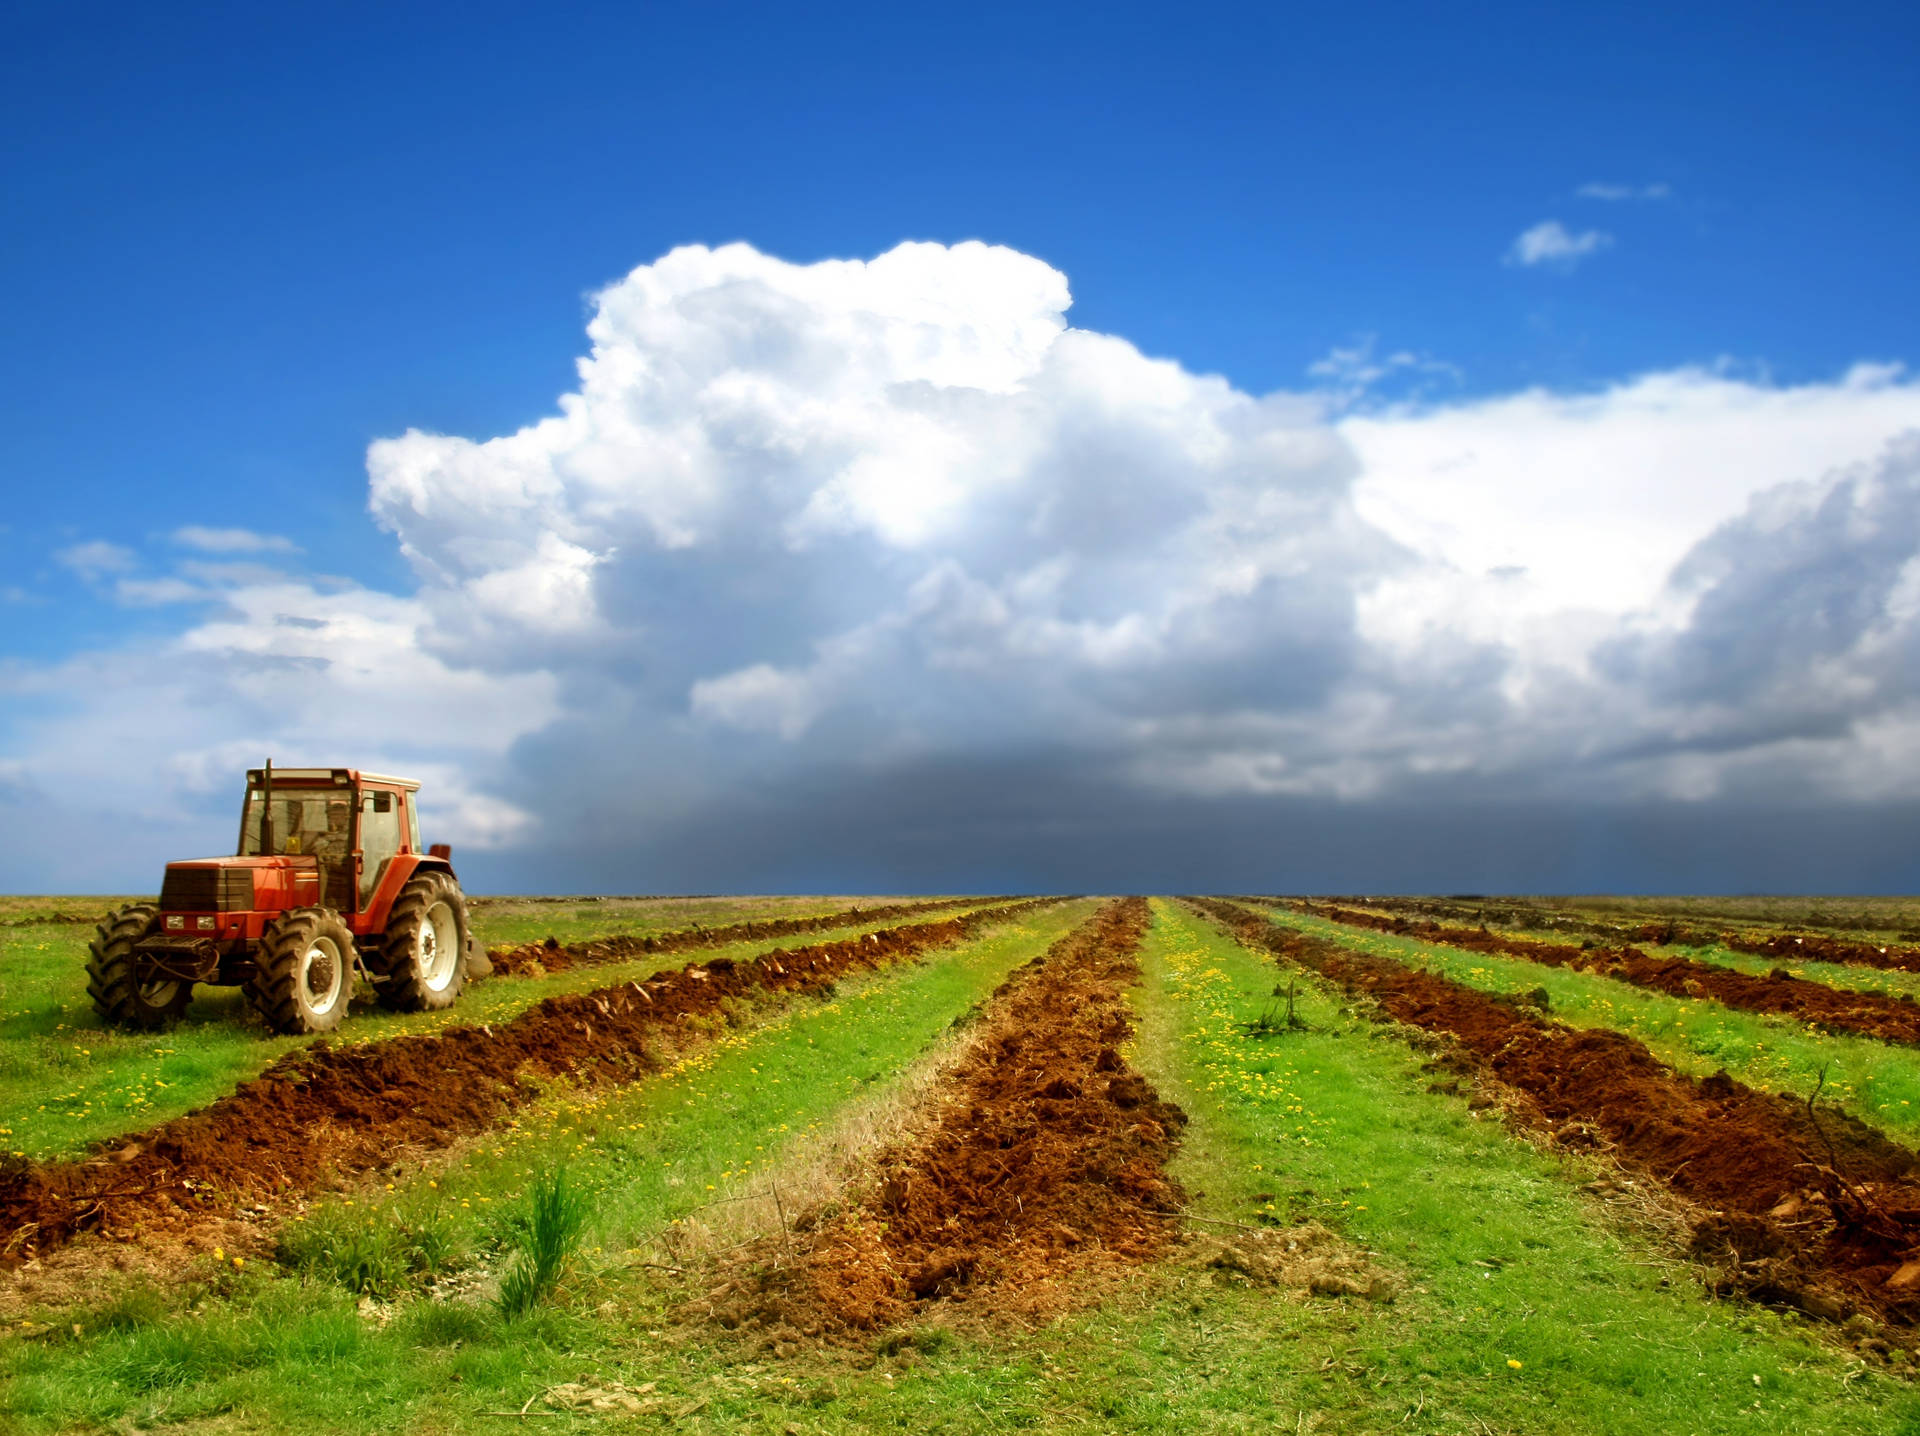 Free Agriculture Wallpaper Downloads, [100+] Agriculture Wallpapers for  FREE 